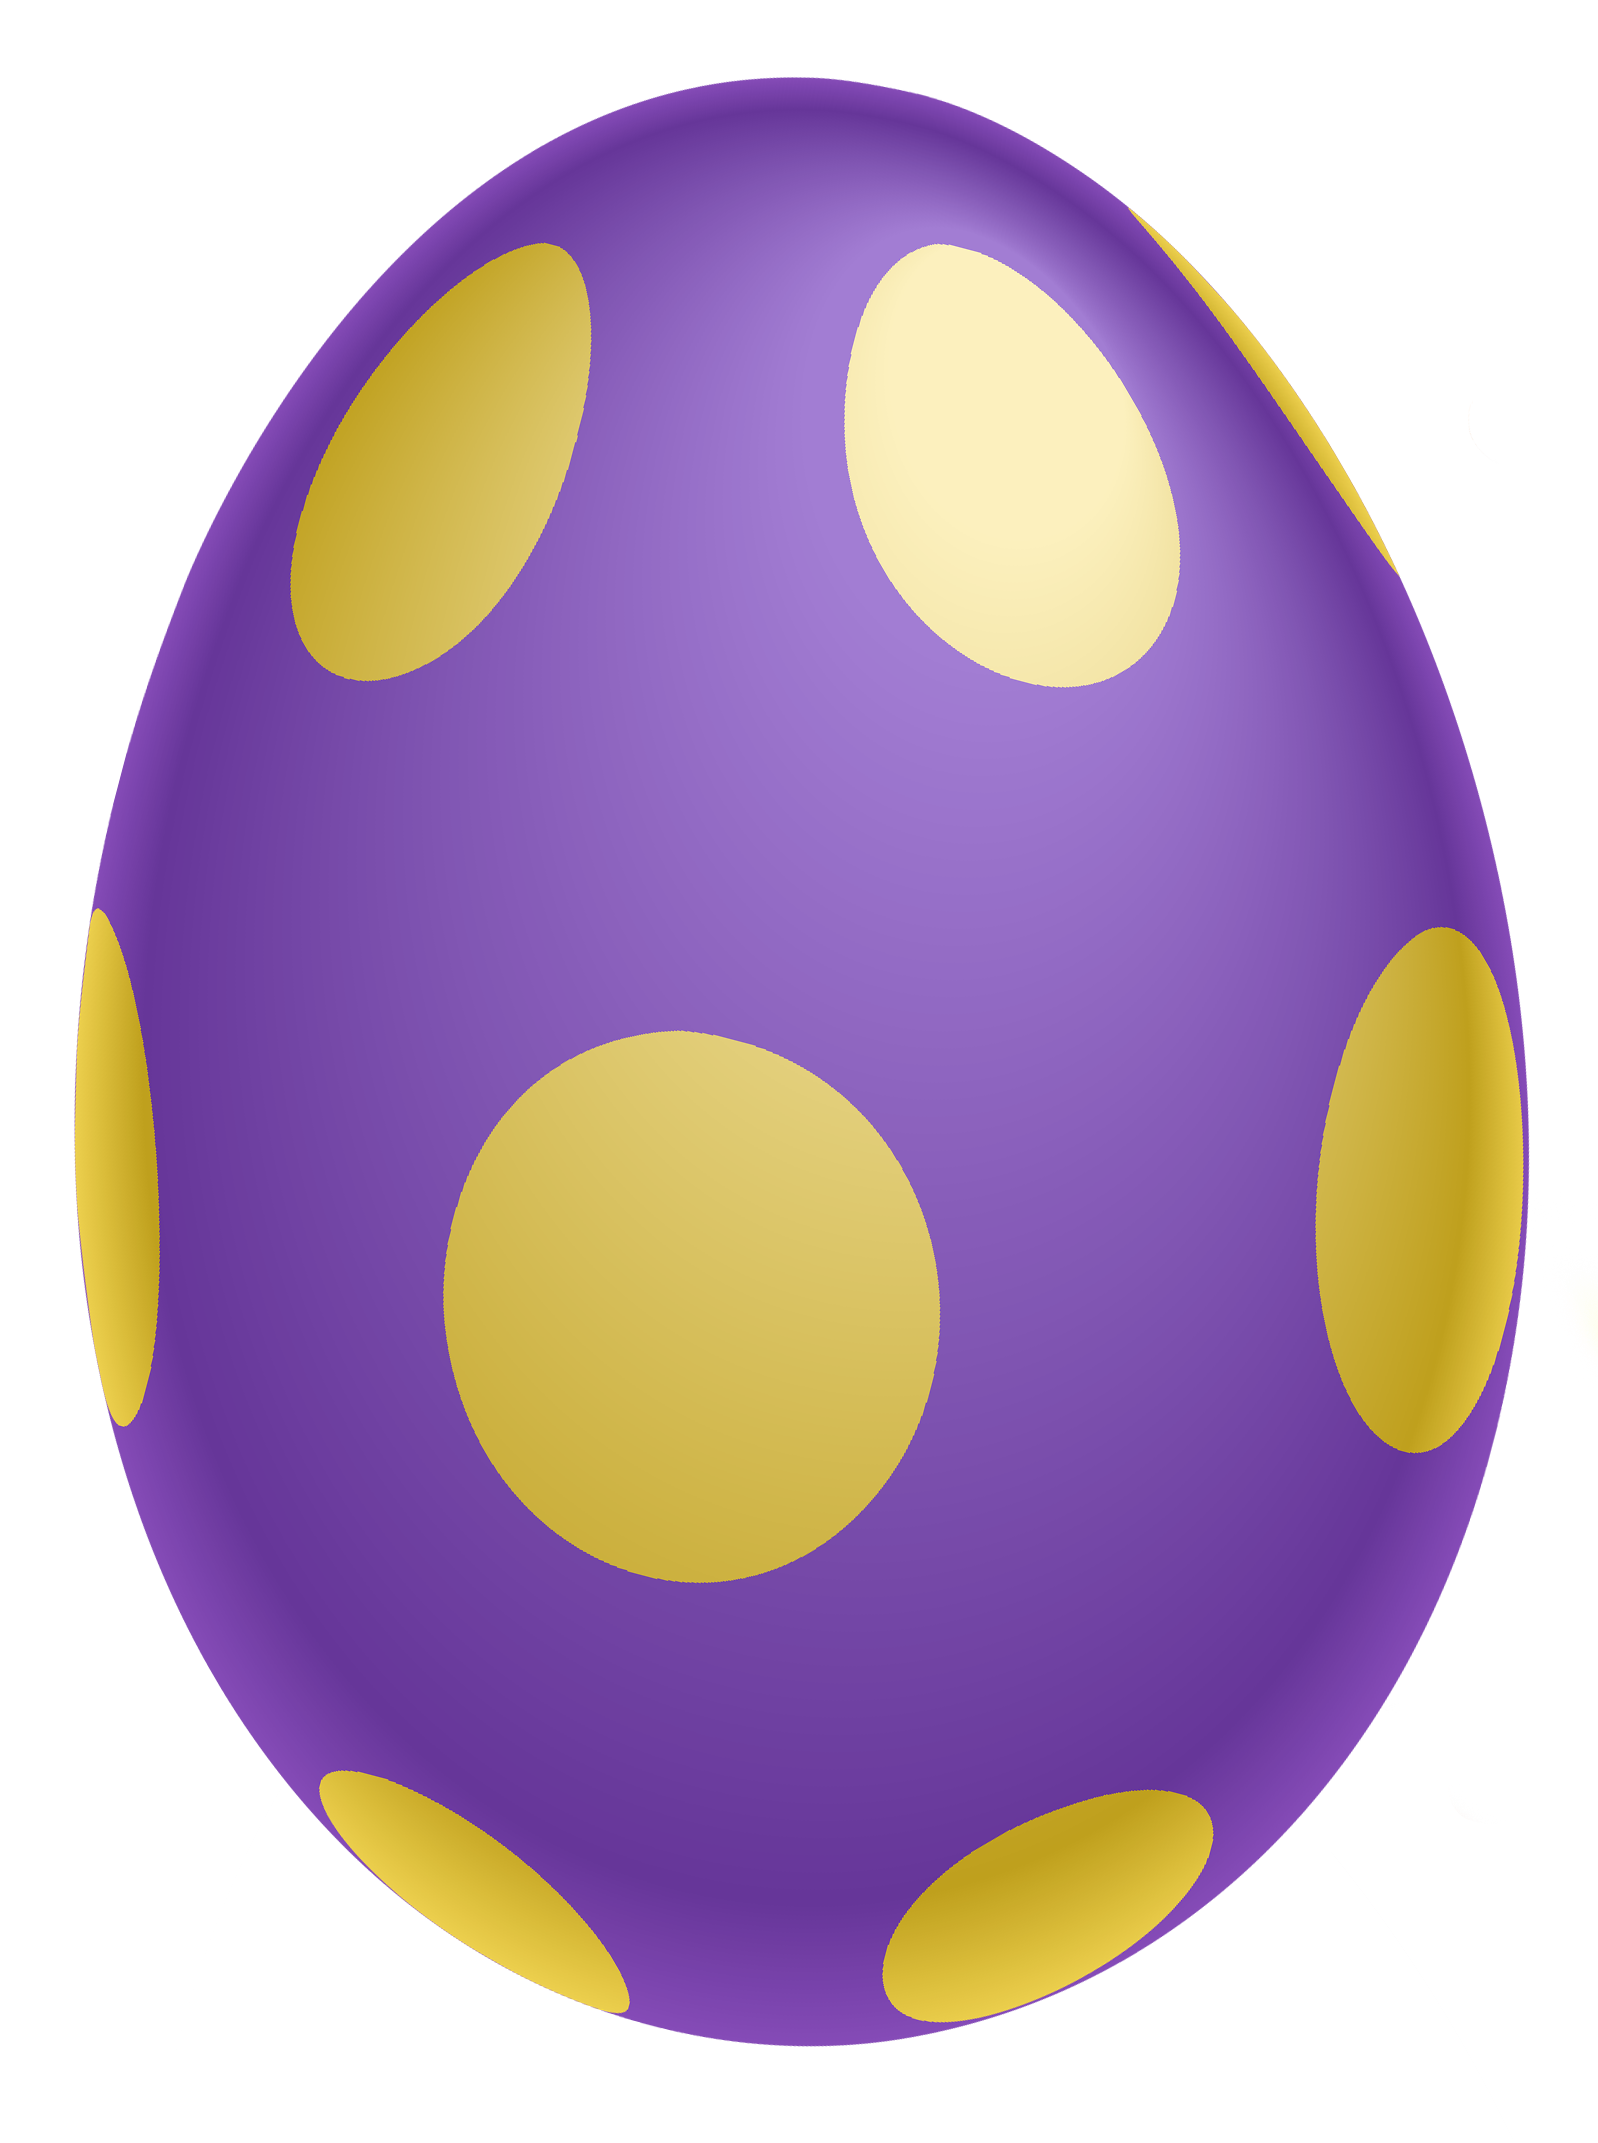 clipart easter chocolate